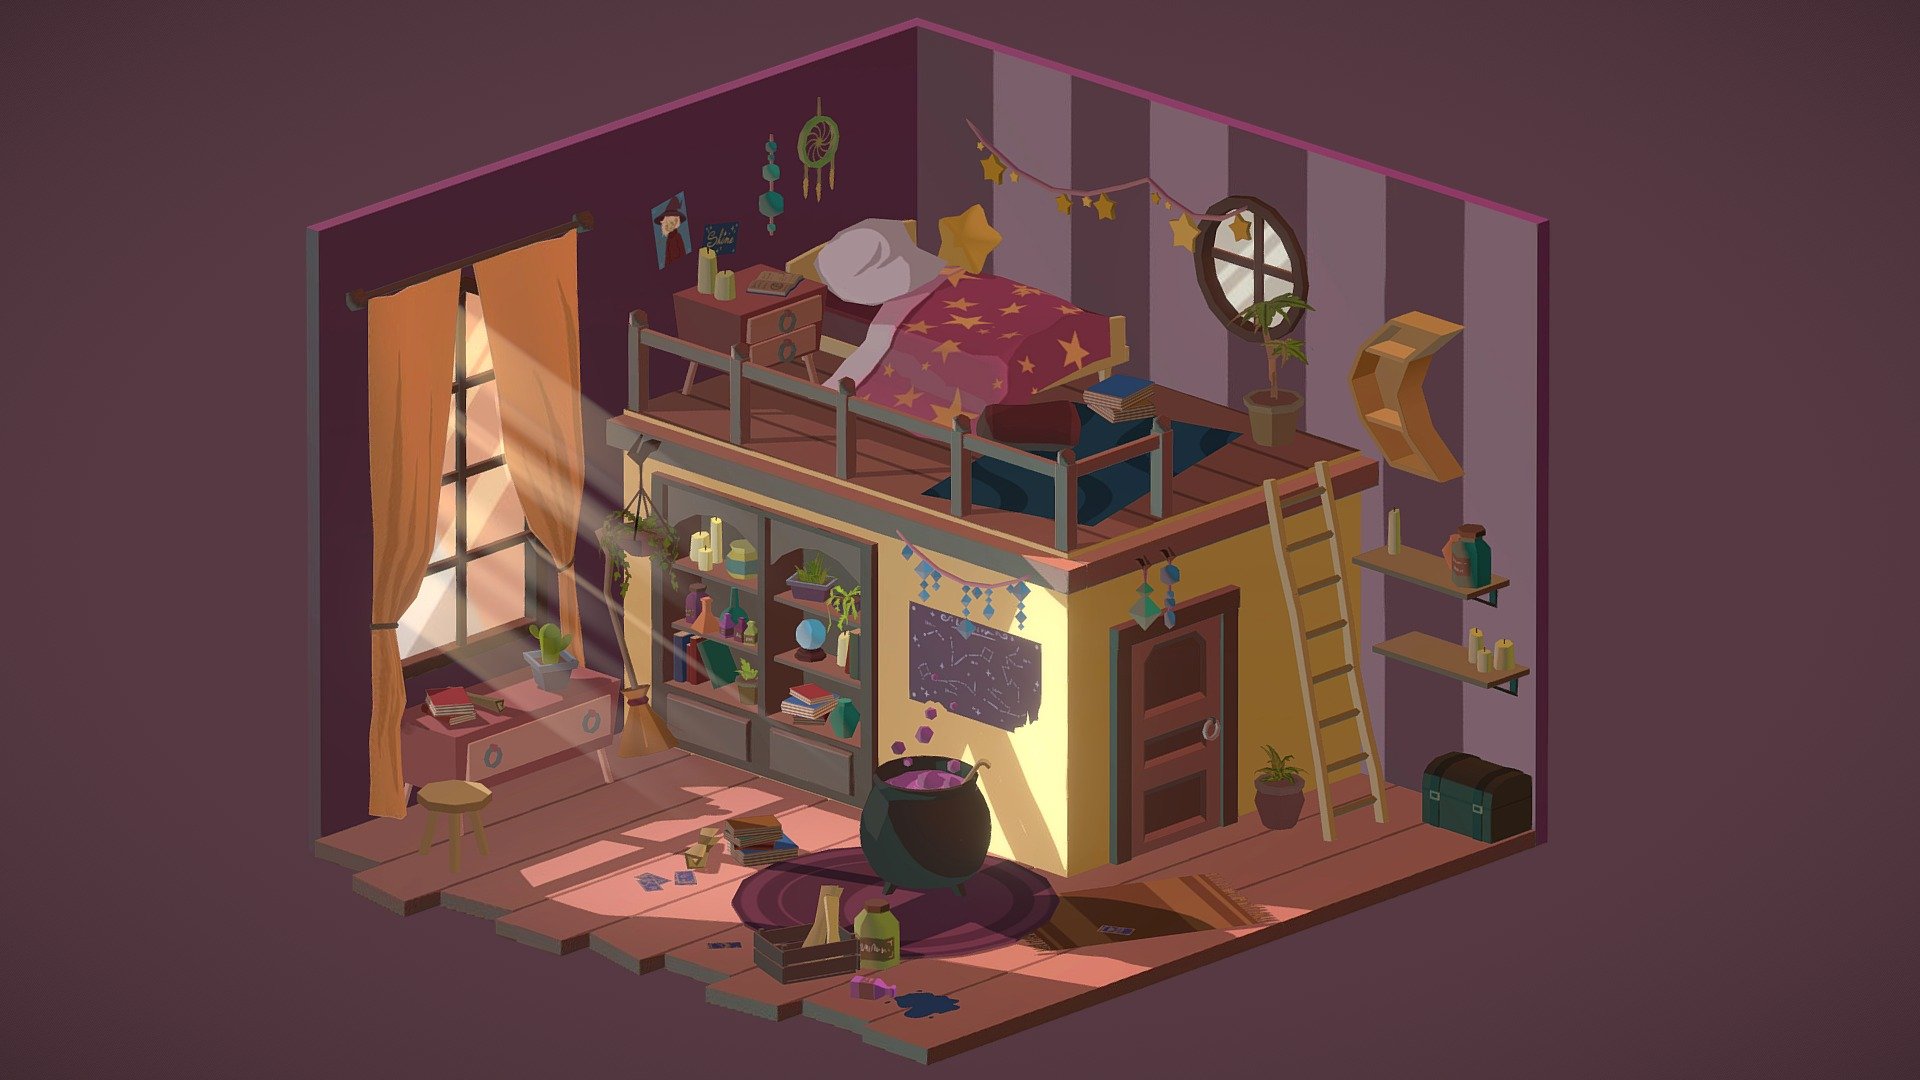 It's October and I wanted to make a little scene in the atmosphere of this month.
And I still love witches stuff.

It's also my participation for the #Isometric2020Challenge 3d model